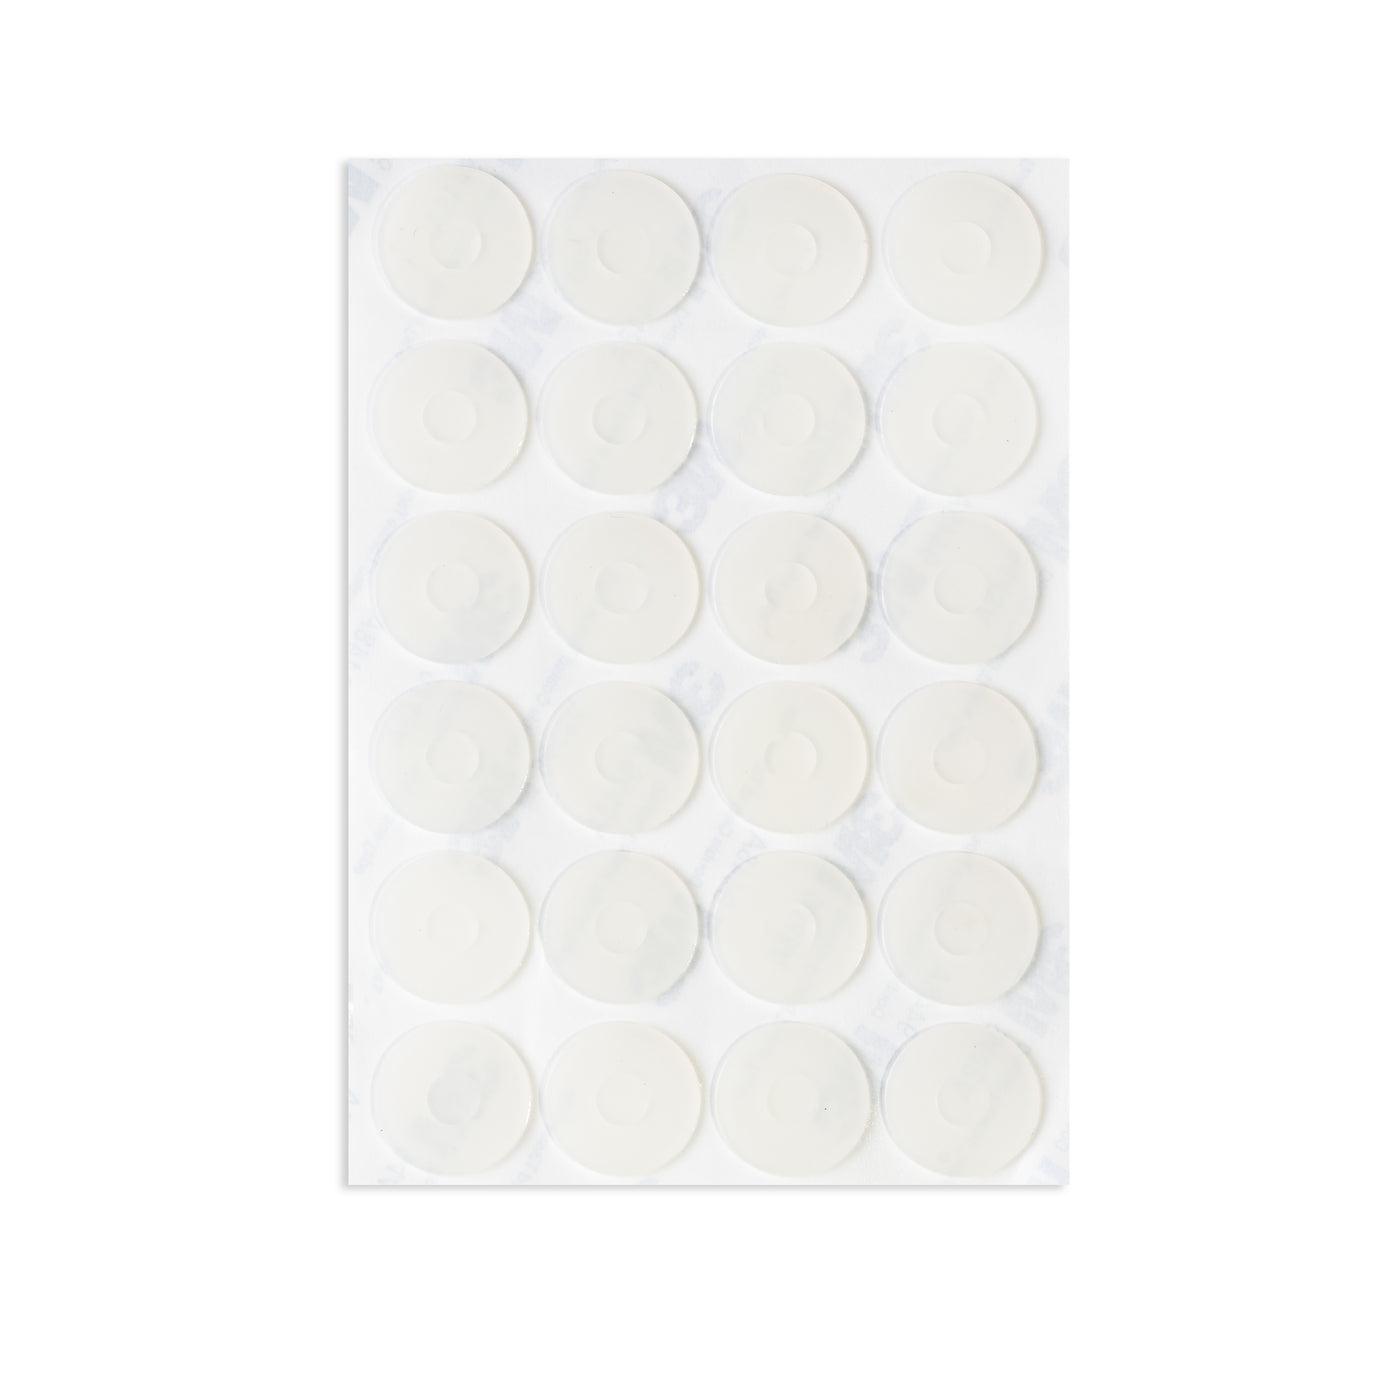 48 Pieces Non-Slip Silicone Grips for Quilting Templates